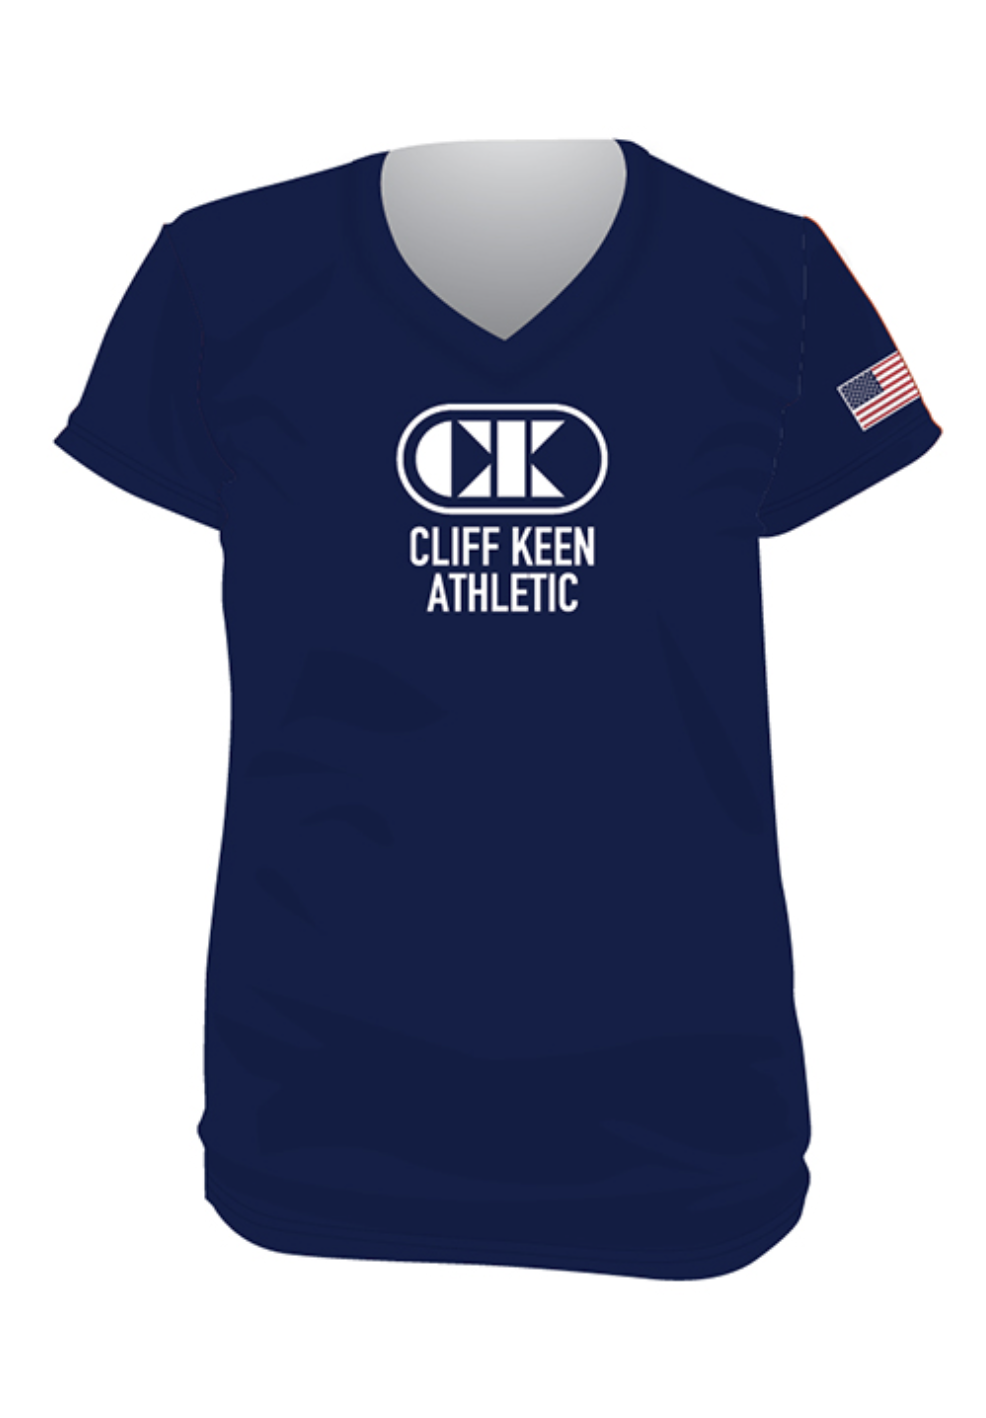 Cliff Keen | SWLSSVCK | Women's Sublimated V-Neck Loose Gear Shirt | Navy - $39.99